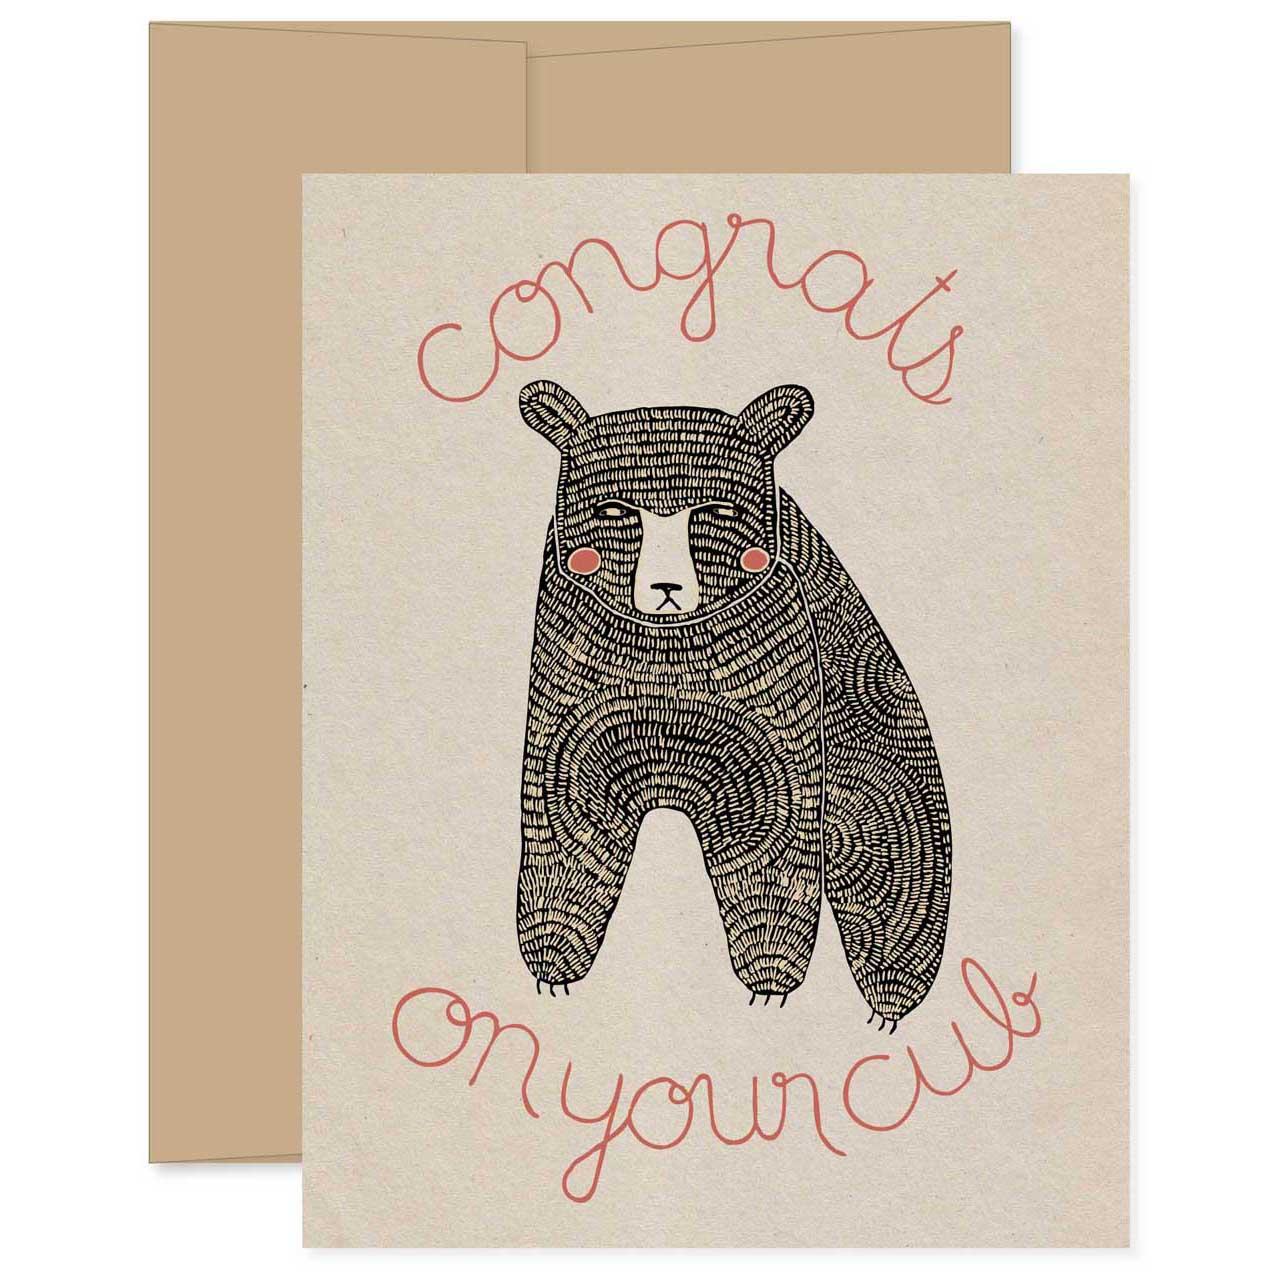 Congrats On Your Cub Card